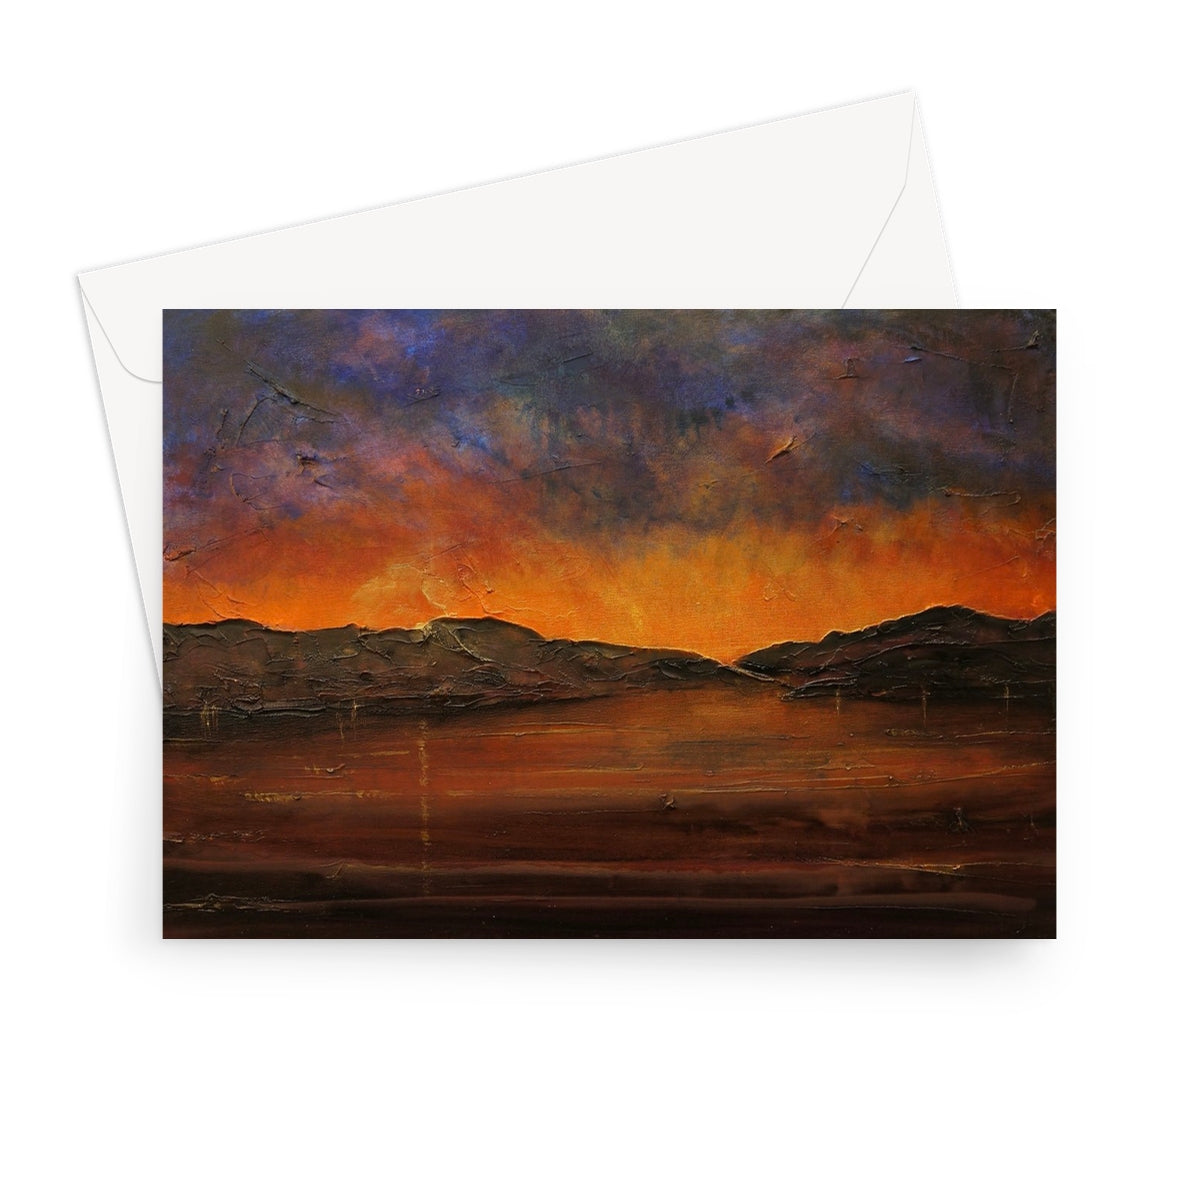 A Brooding Clyde Dusk Art Gifts Greeting Card-Stationery-River Clyde Art Gallery-7"x5"-10 Cards-Paintings, Prints, Homeware, Art Gifts From Scotland By Scottish Artist Kevin Hunter